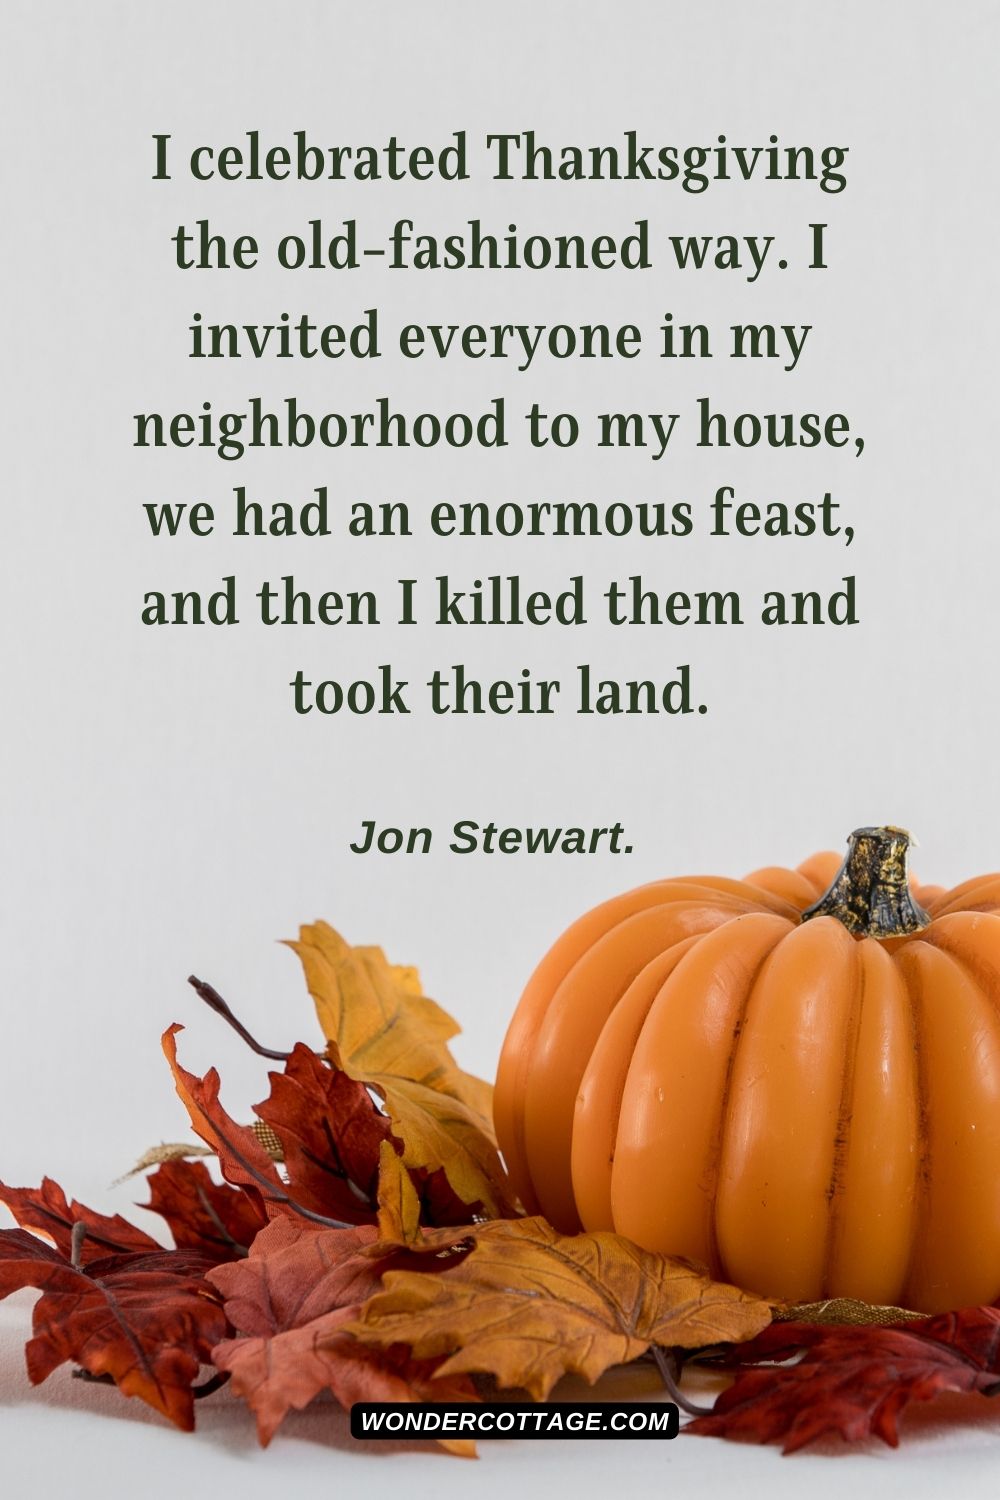 I celebrated Thanksgiving the old-fashioned way. I invited everyone in my neighborhood to my house, we had an enormous feast, and then I killed them and took their land. Jon Stewart. 